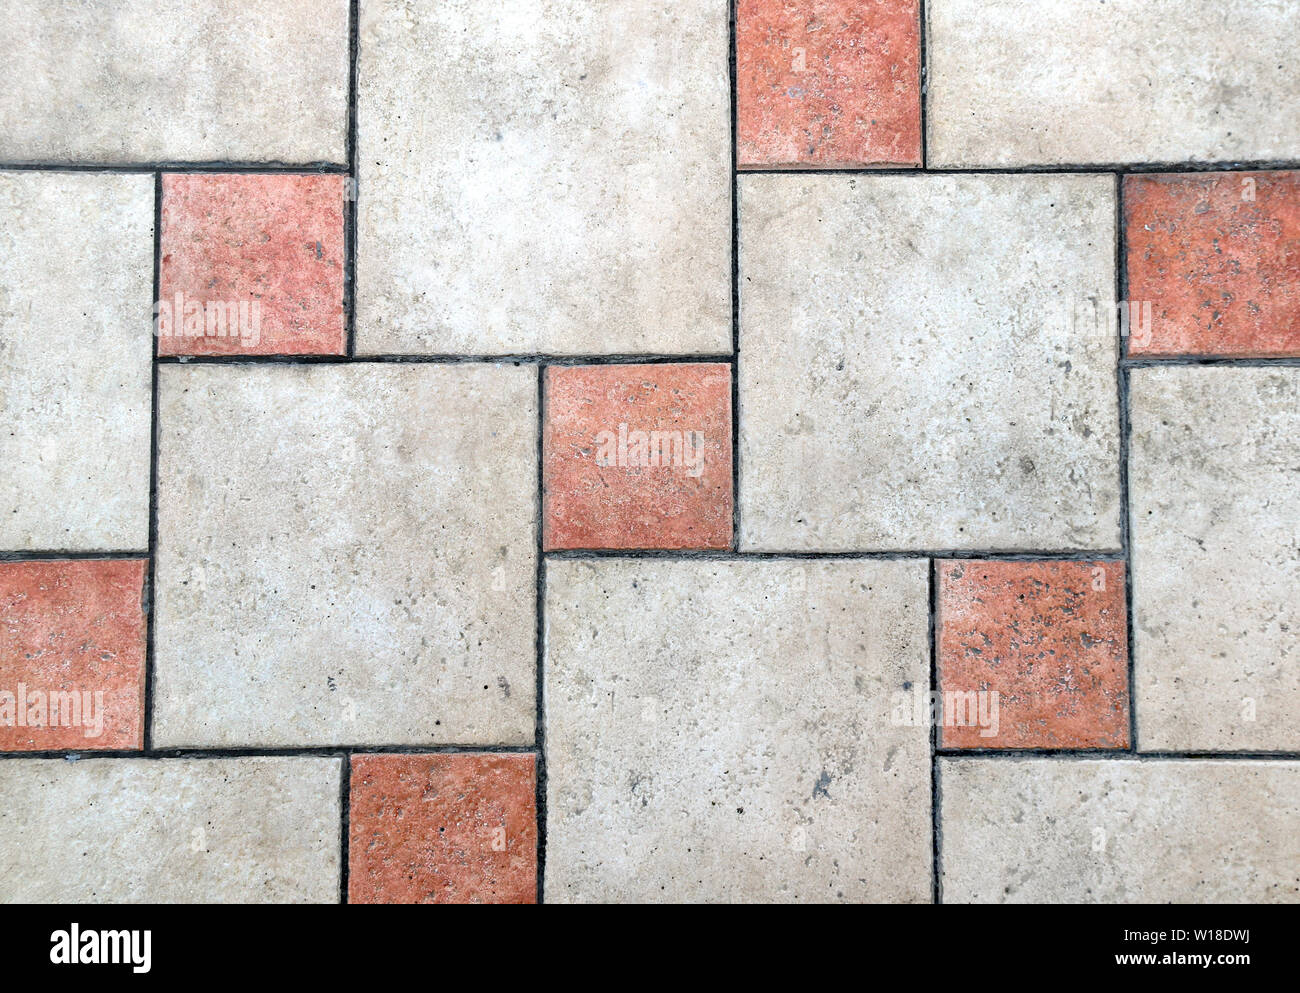 Old Porcelain Tiles Floor Texture With Tiles Of Red And Beige